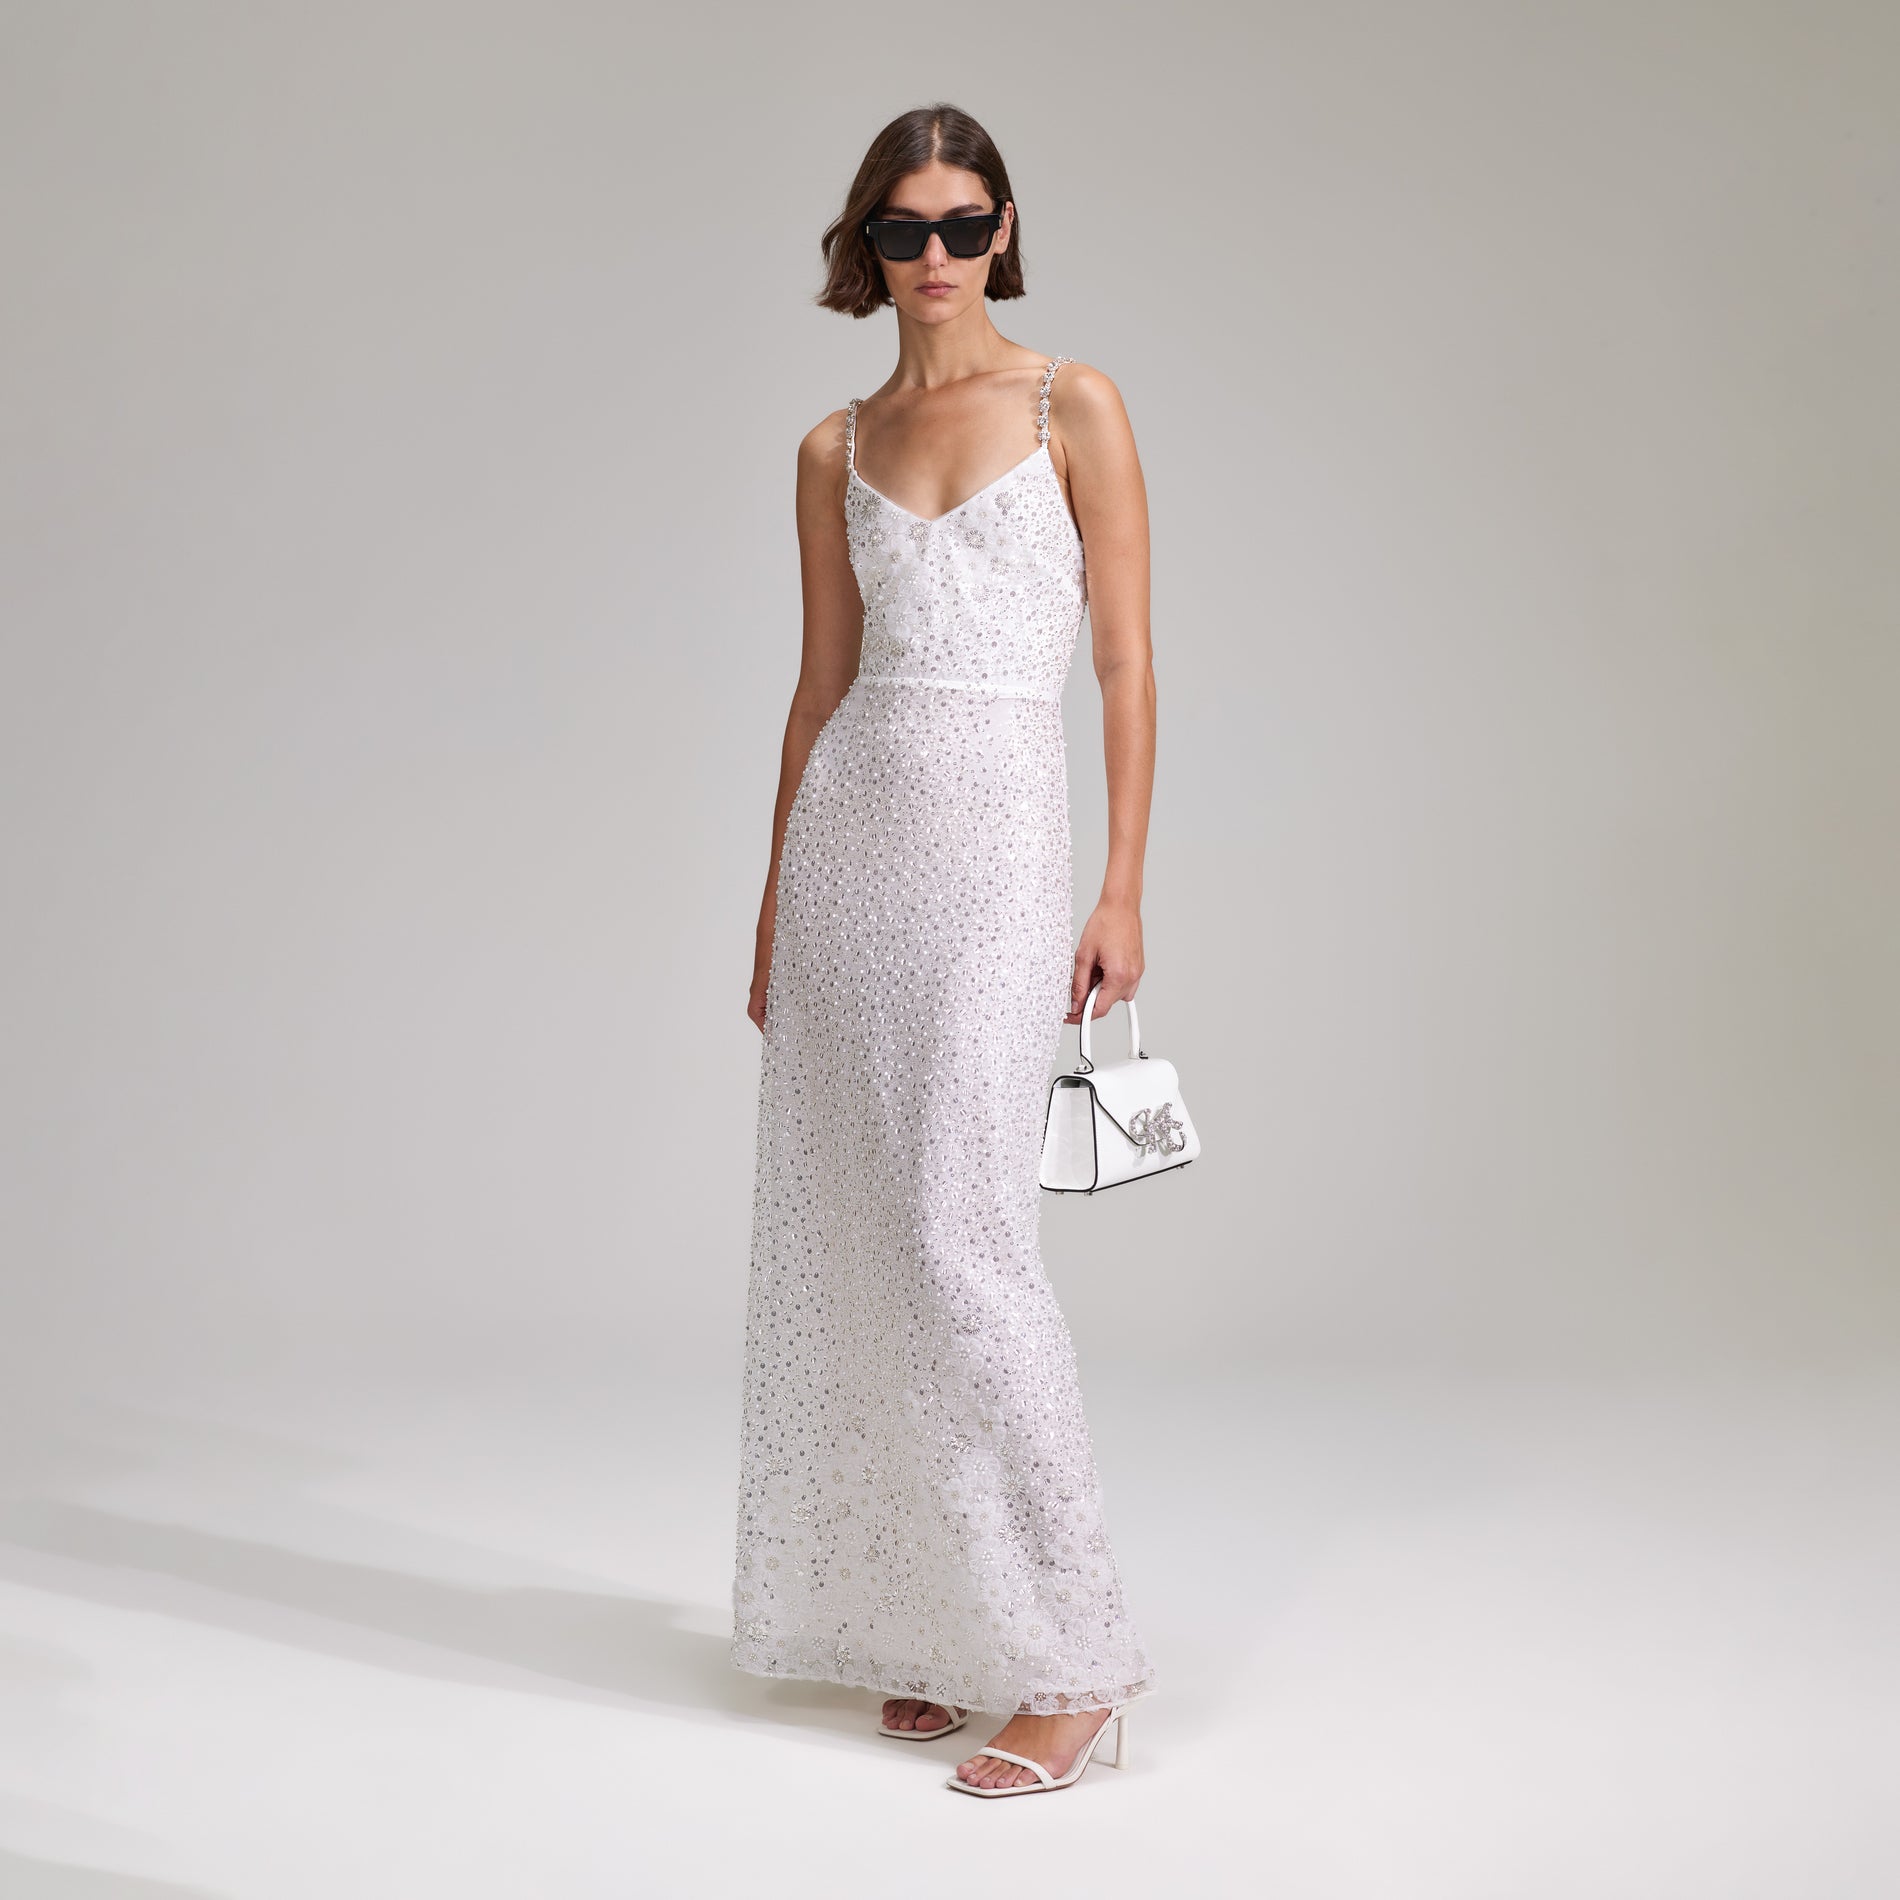 A woman wearing the White Beaded Sequin Maxi Dress